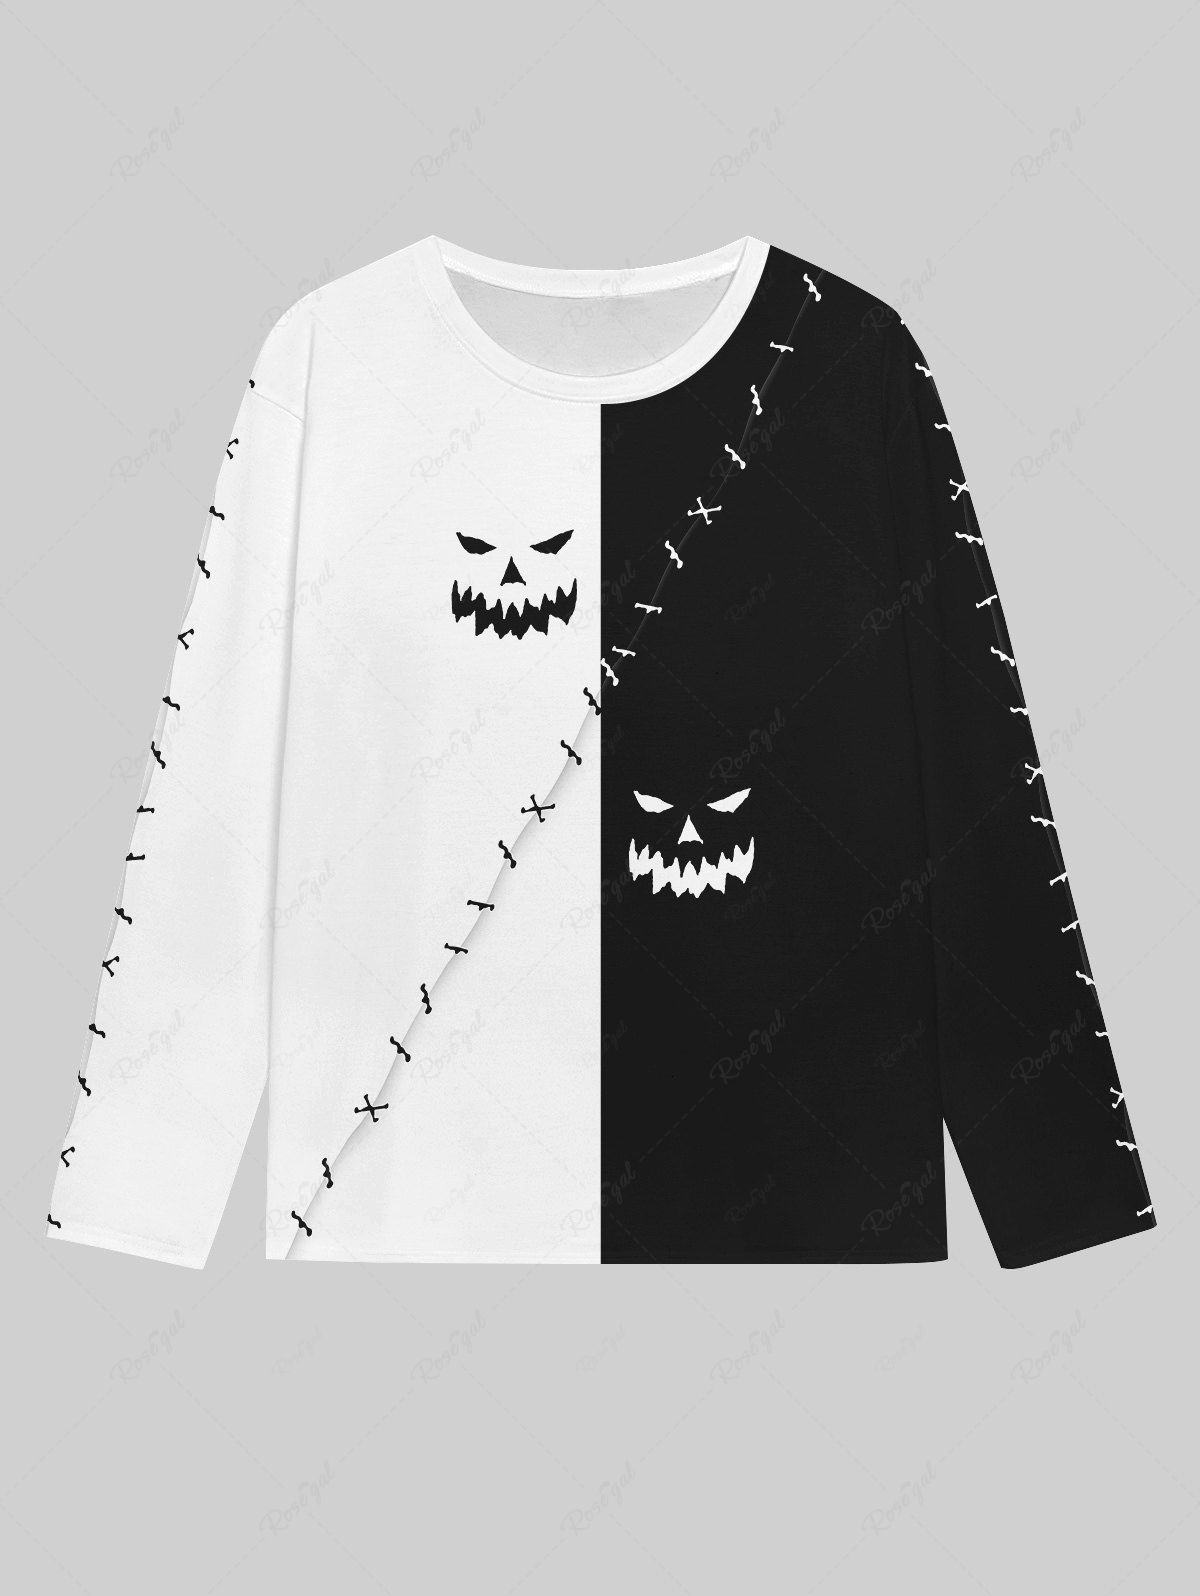 Online Gothic 3D Ghost Face Topstitching Two Tone Print Halloween T-shirt For Men  